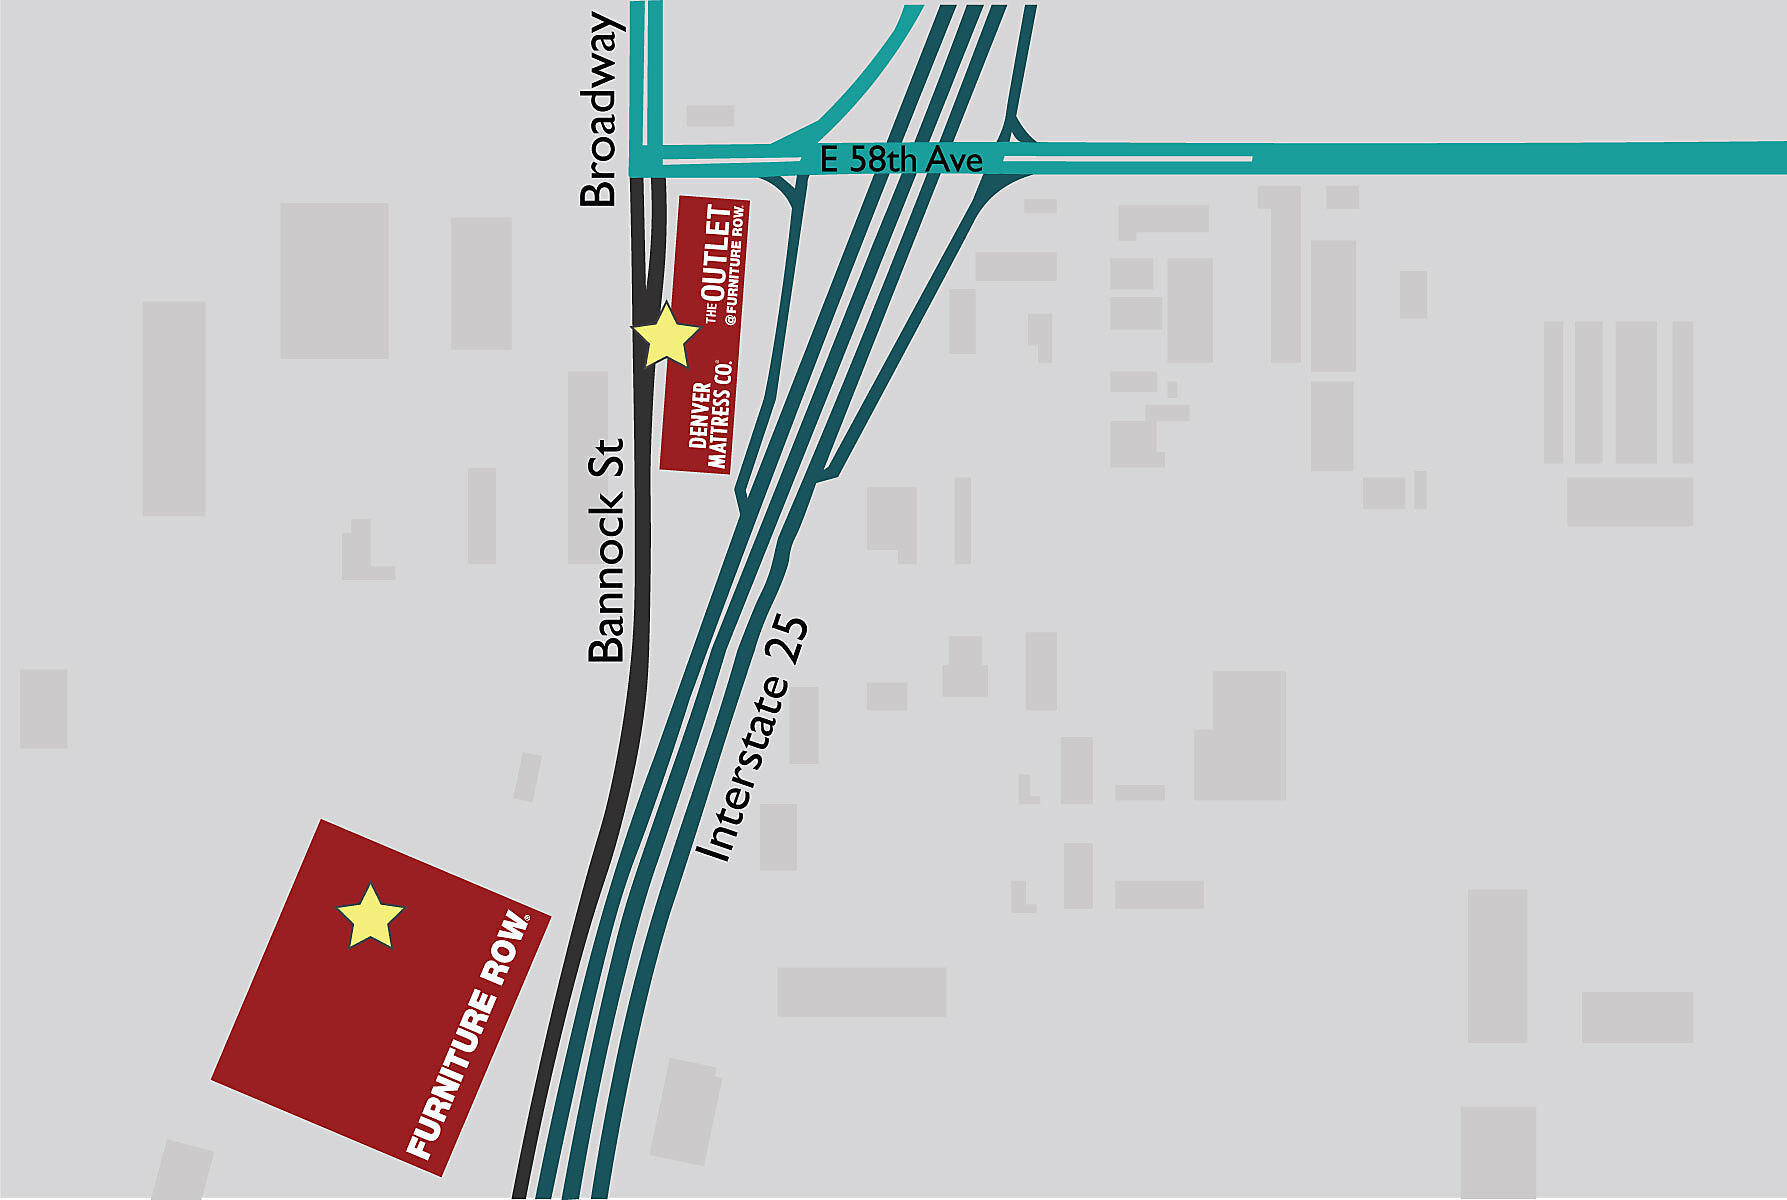 Furniture Row Superstore Location Map